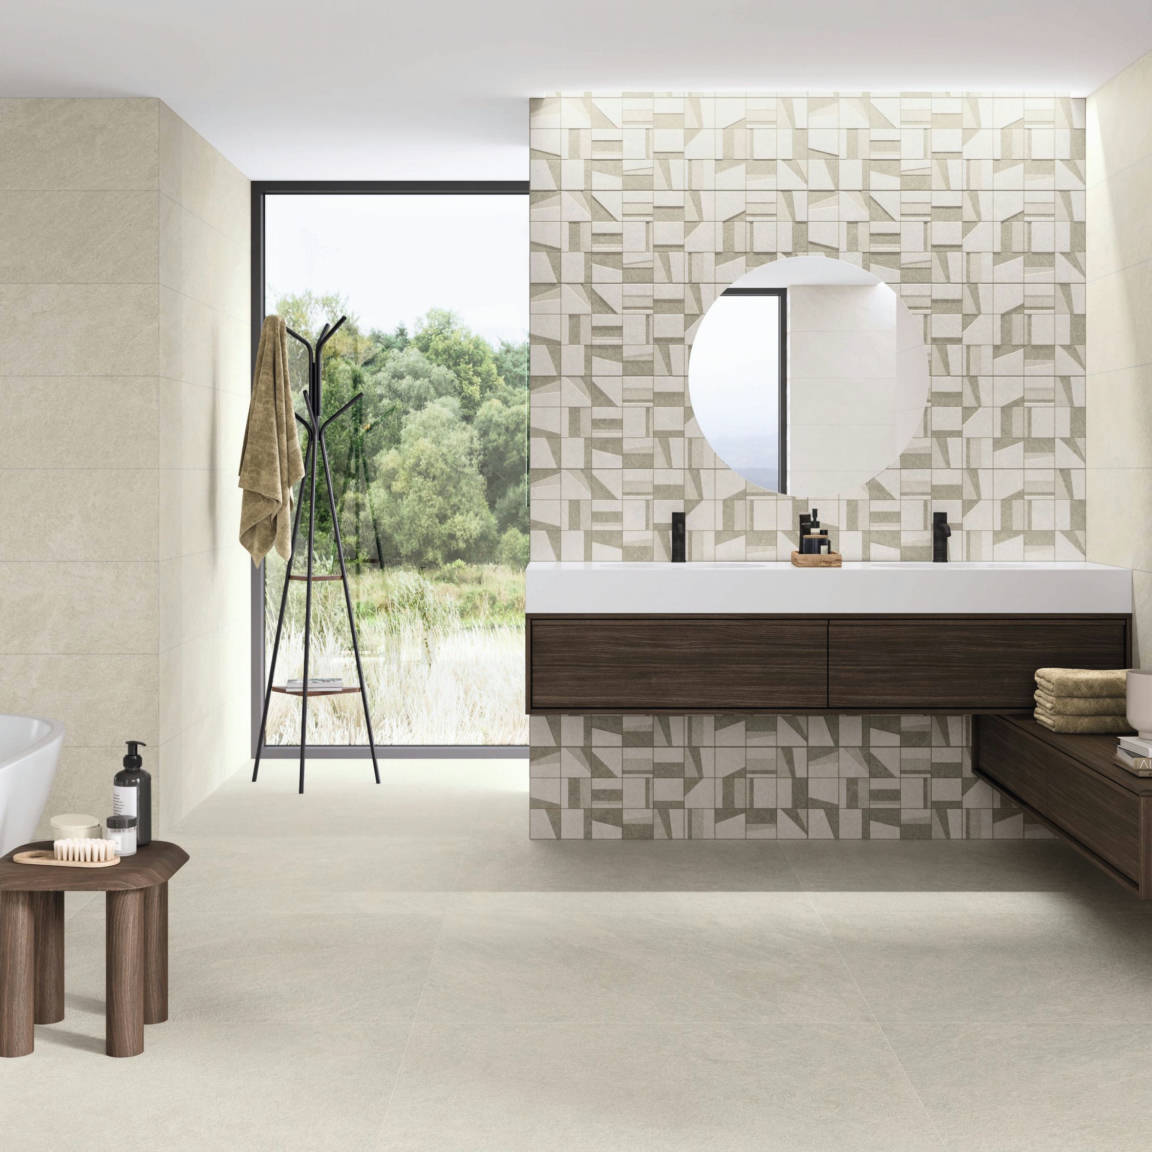 Rodano_1_G | Stones And More | Finest selection of Mosaics, Glass, Tile and Stone